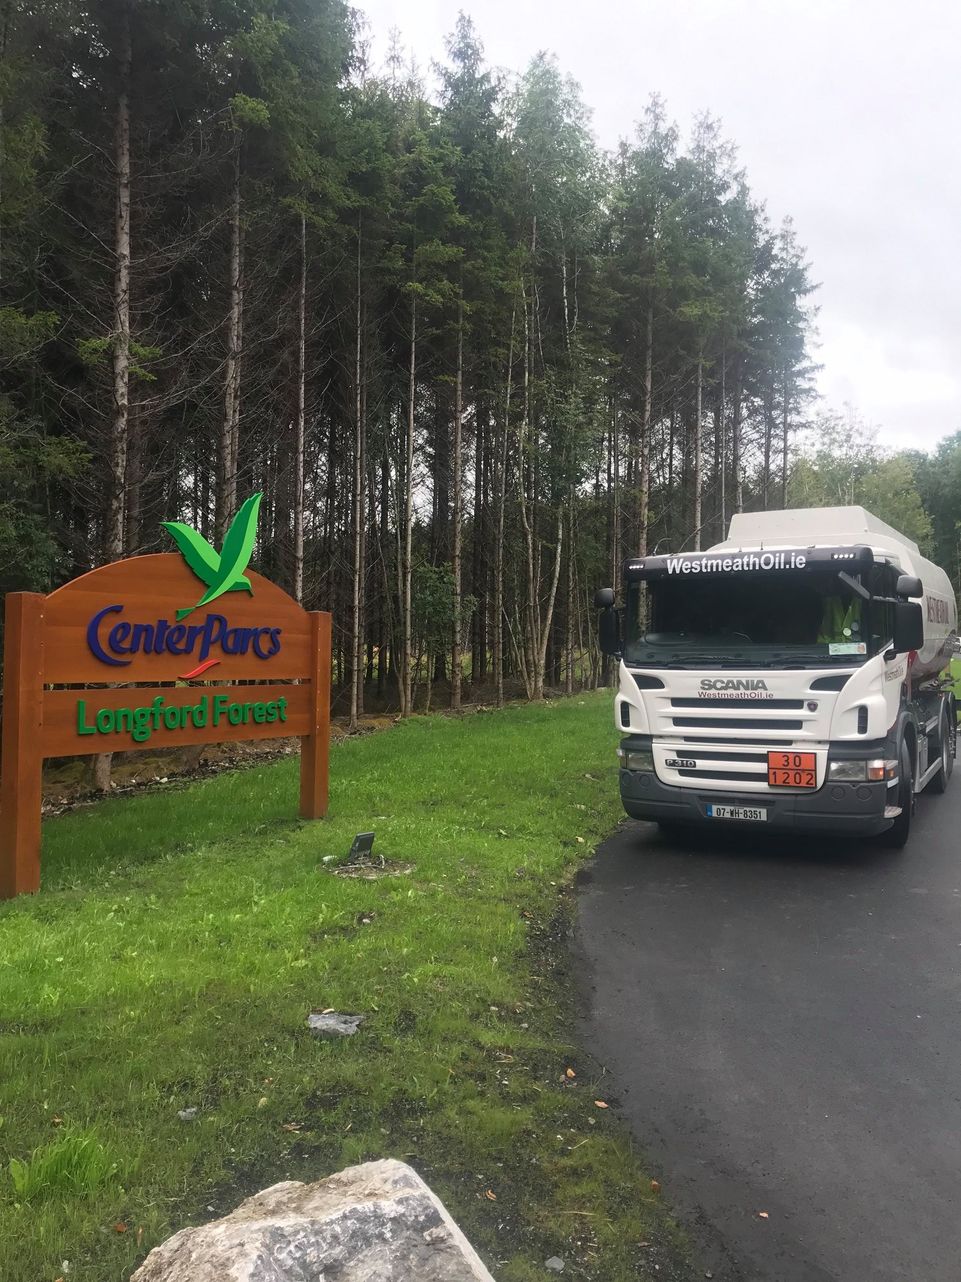 Westmeath Oil truck delivering fuel to Centerparcs in Longford